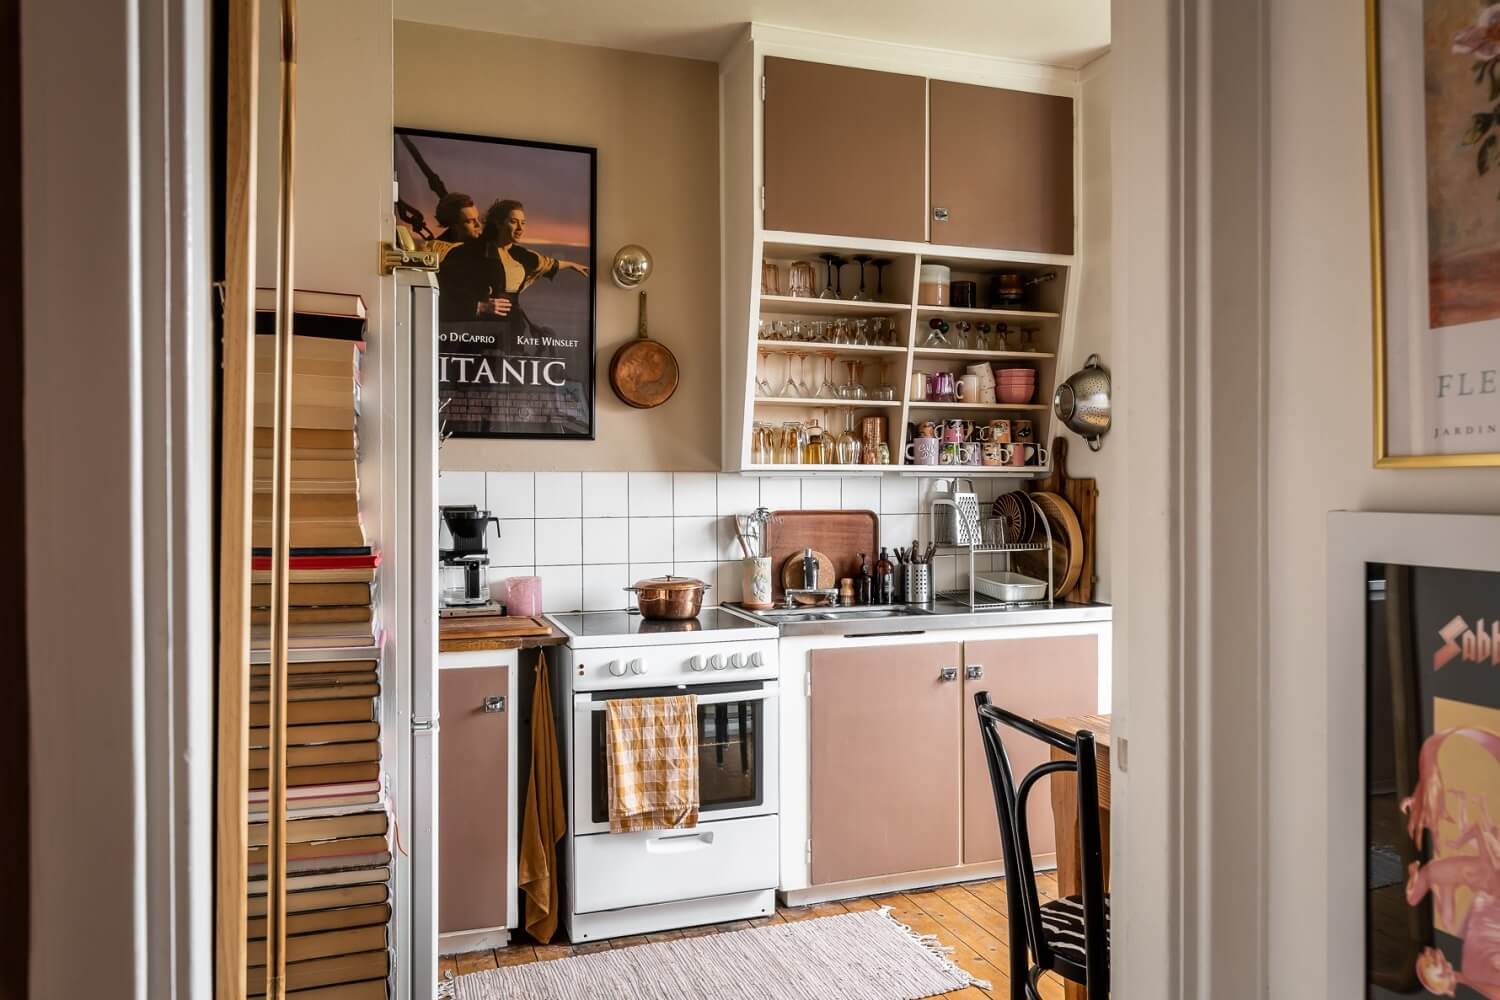 A Pink Studio Apartment with a Midcentury Kitchen - The Nordroom